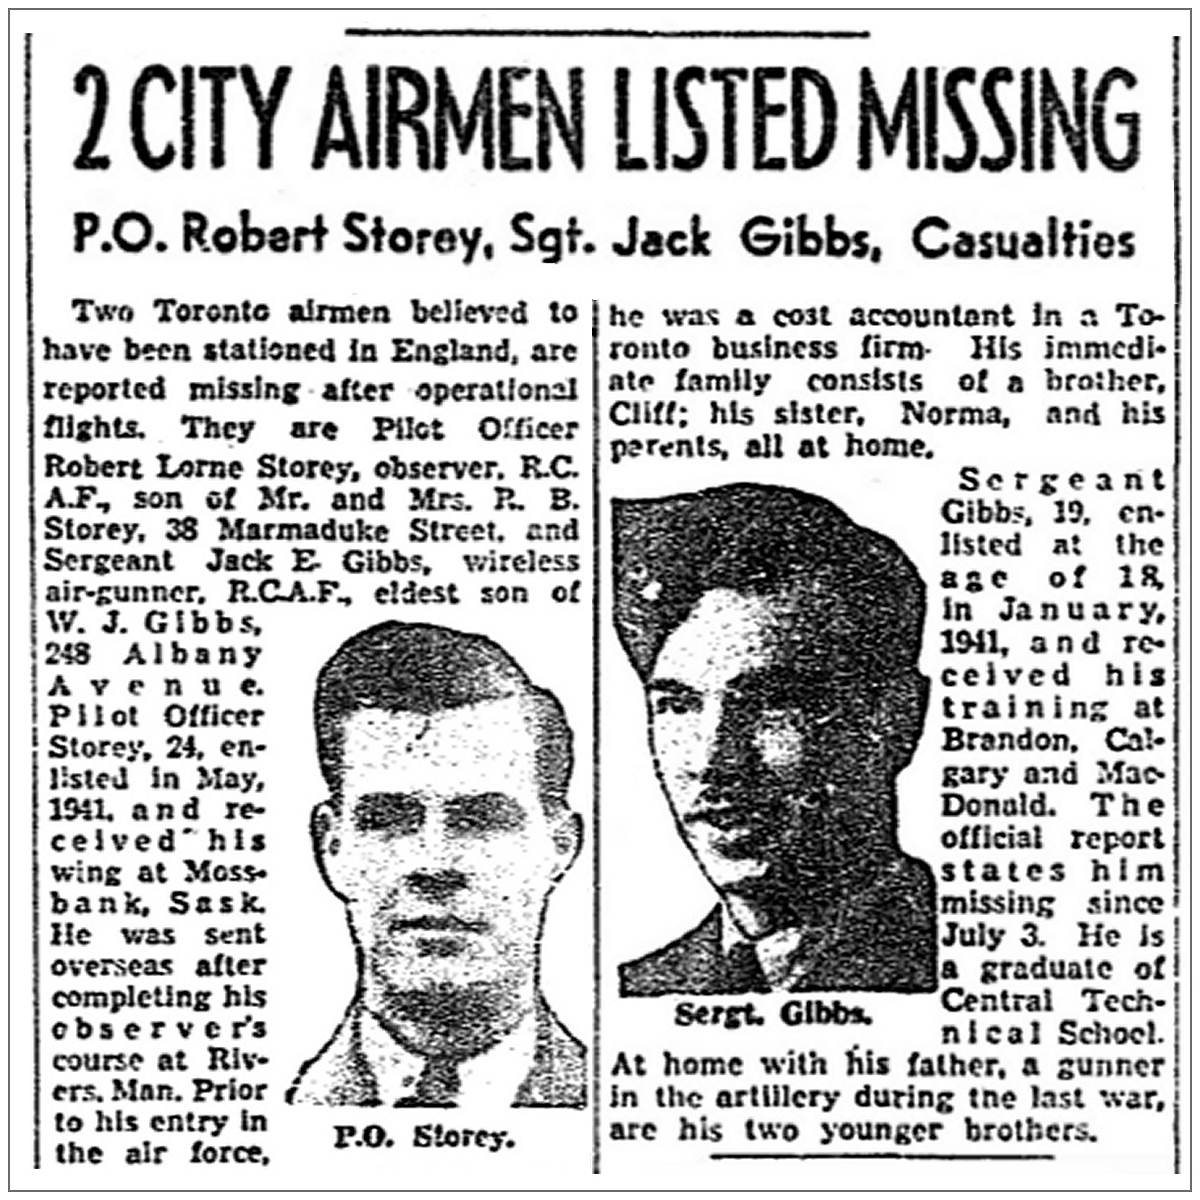 2 city airmen listed missing